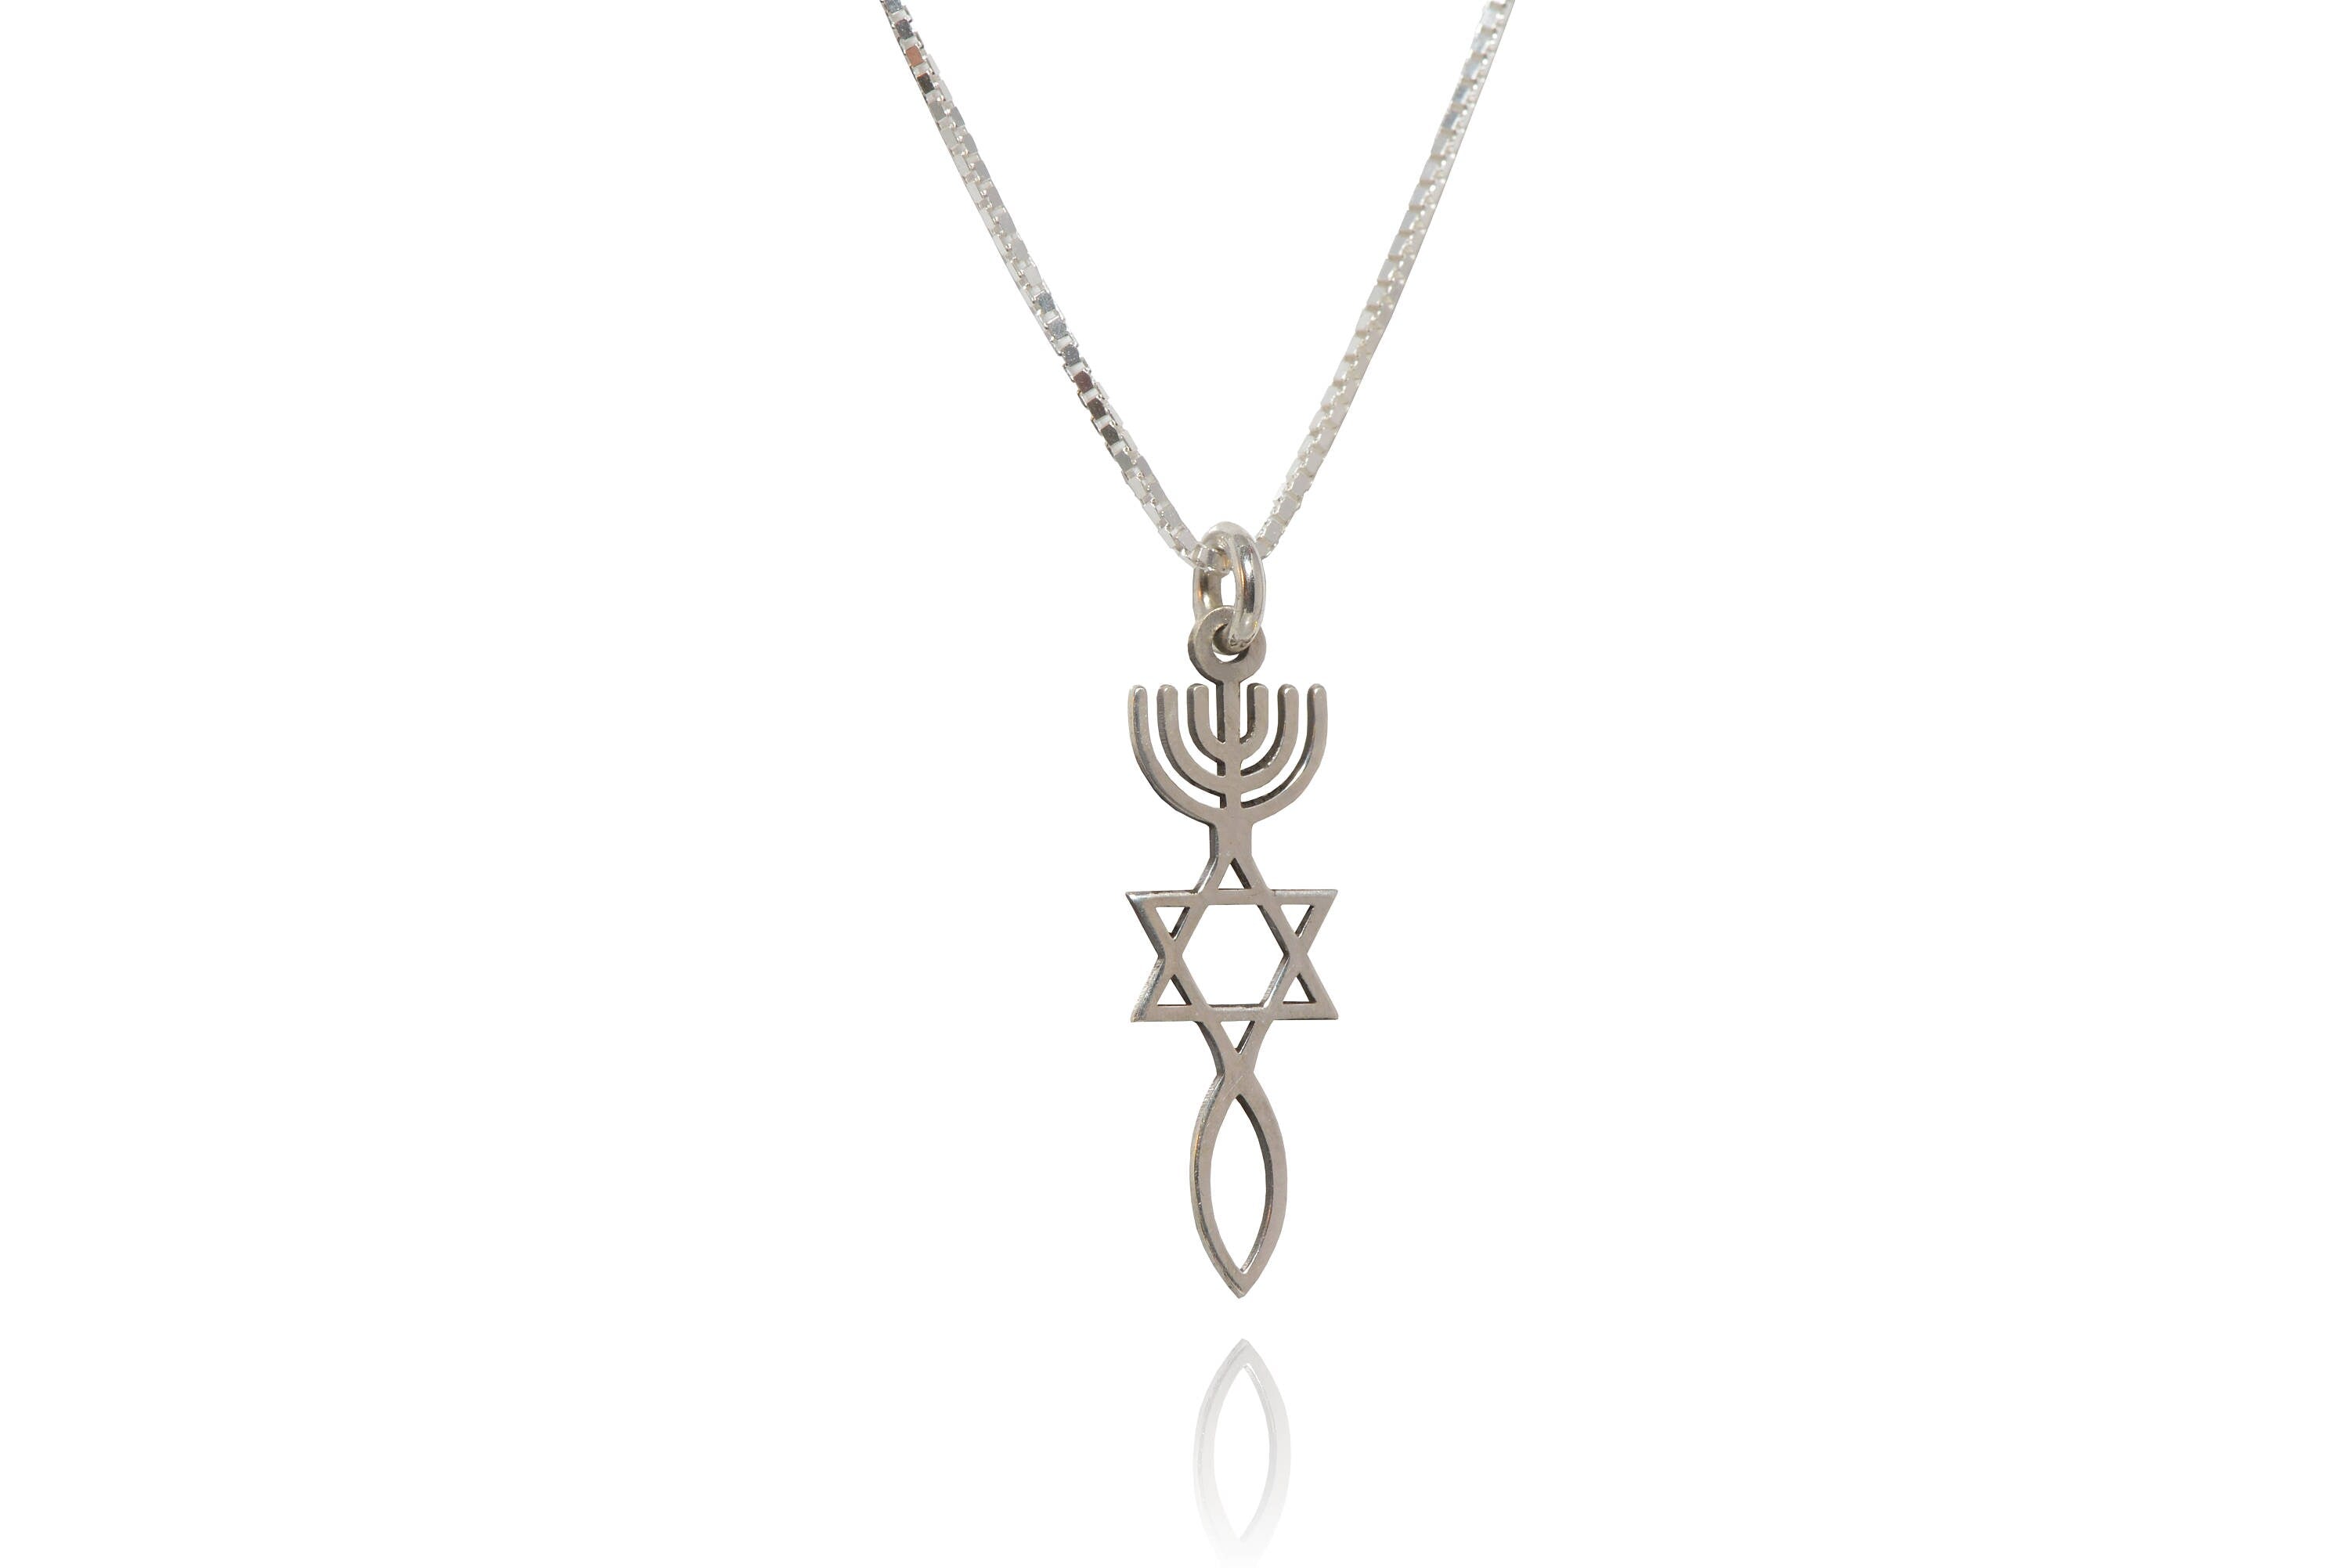 Hebrew Pendant: Sterling Silver Jewish Menorah & Star of David Necklace, Christian Fish Messianic Necklace - Anniversary Jewelry for Women